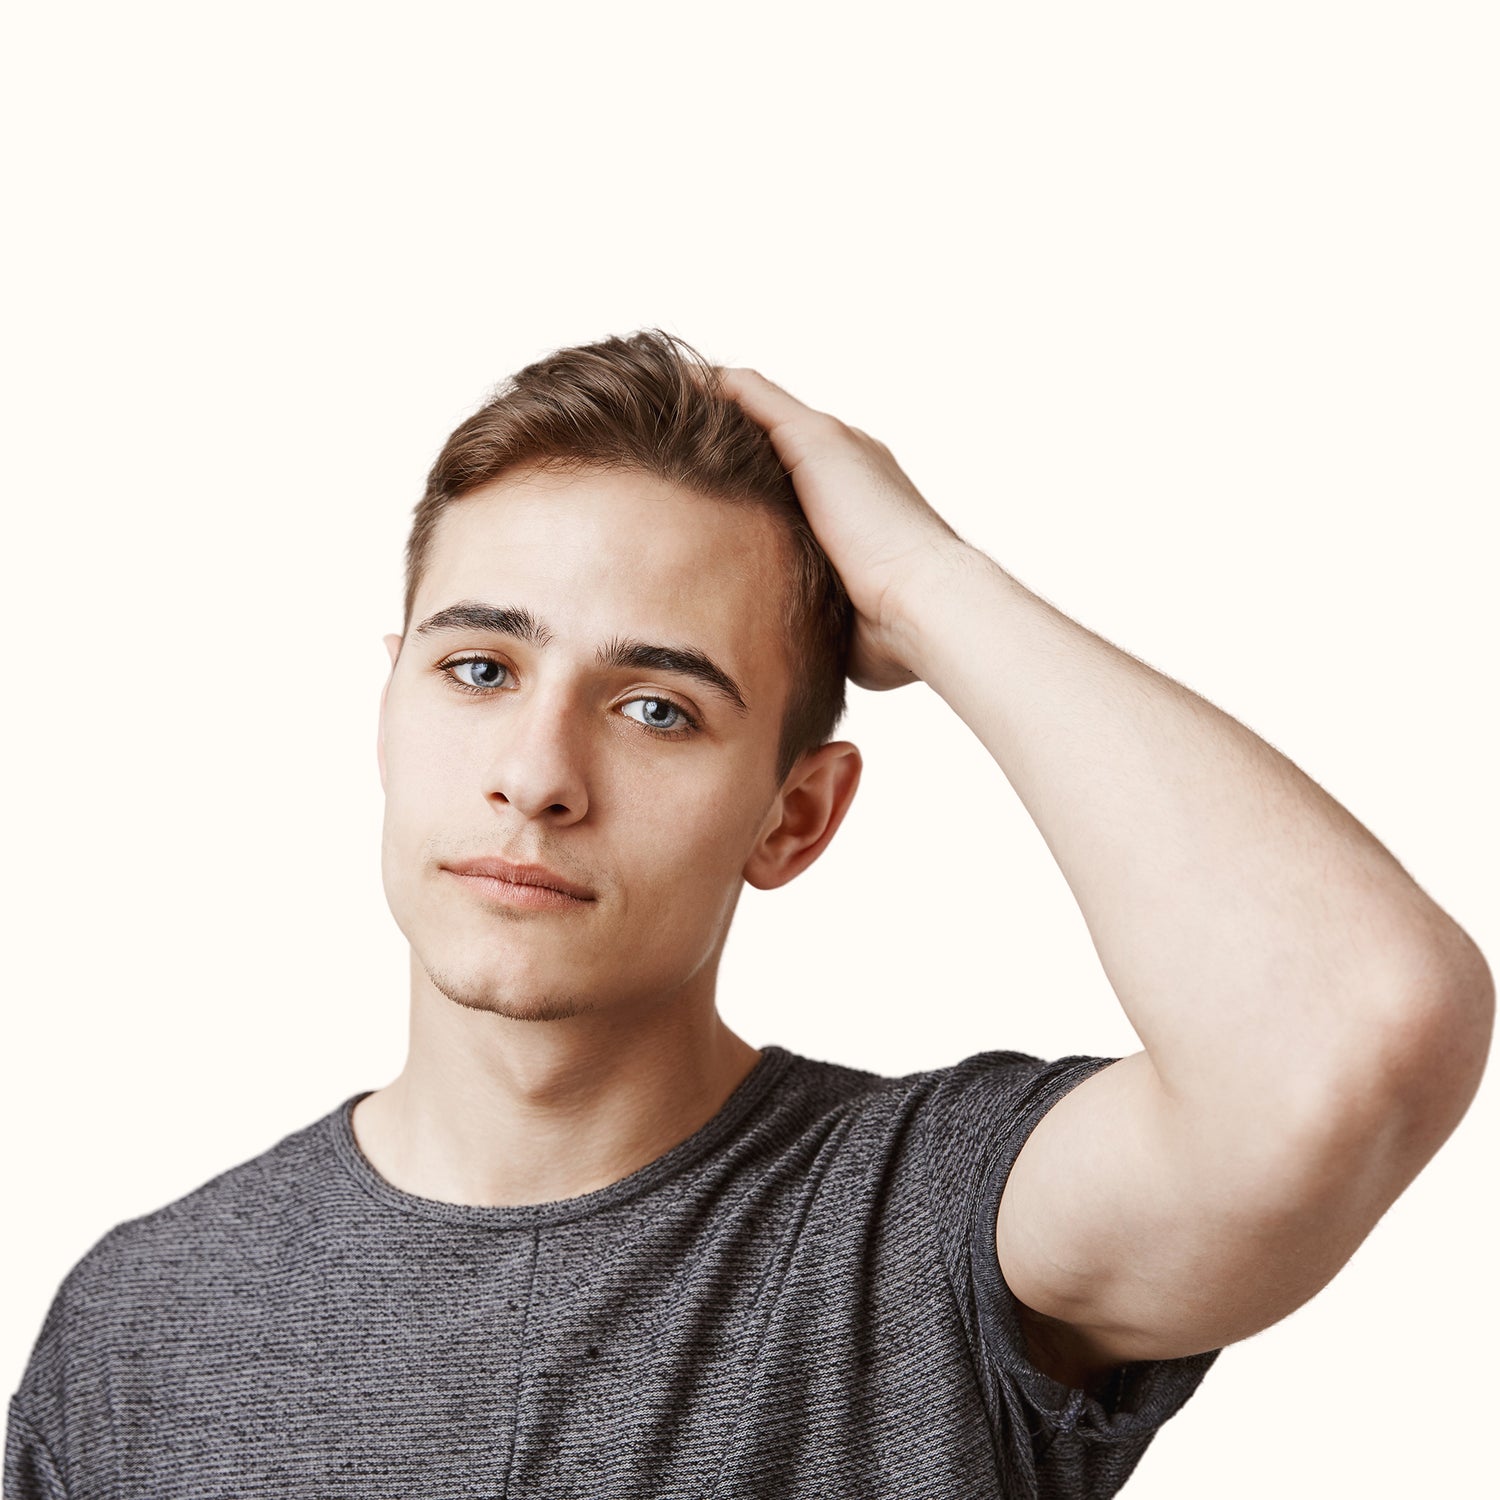 A young man showing the results using hair filling fibers to increase his hairline's density.